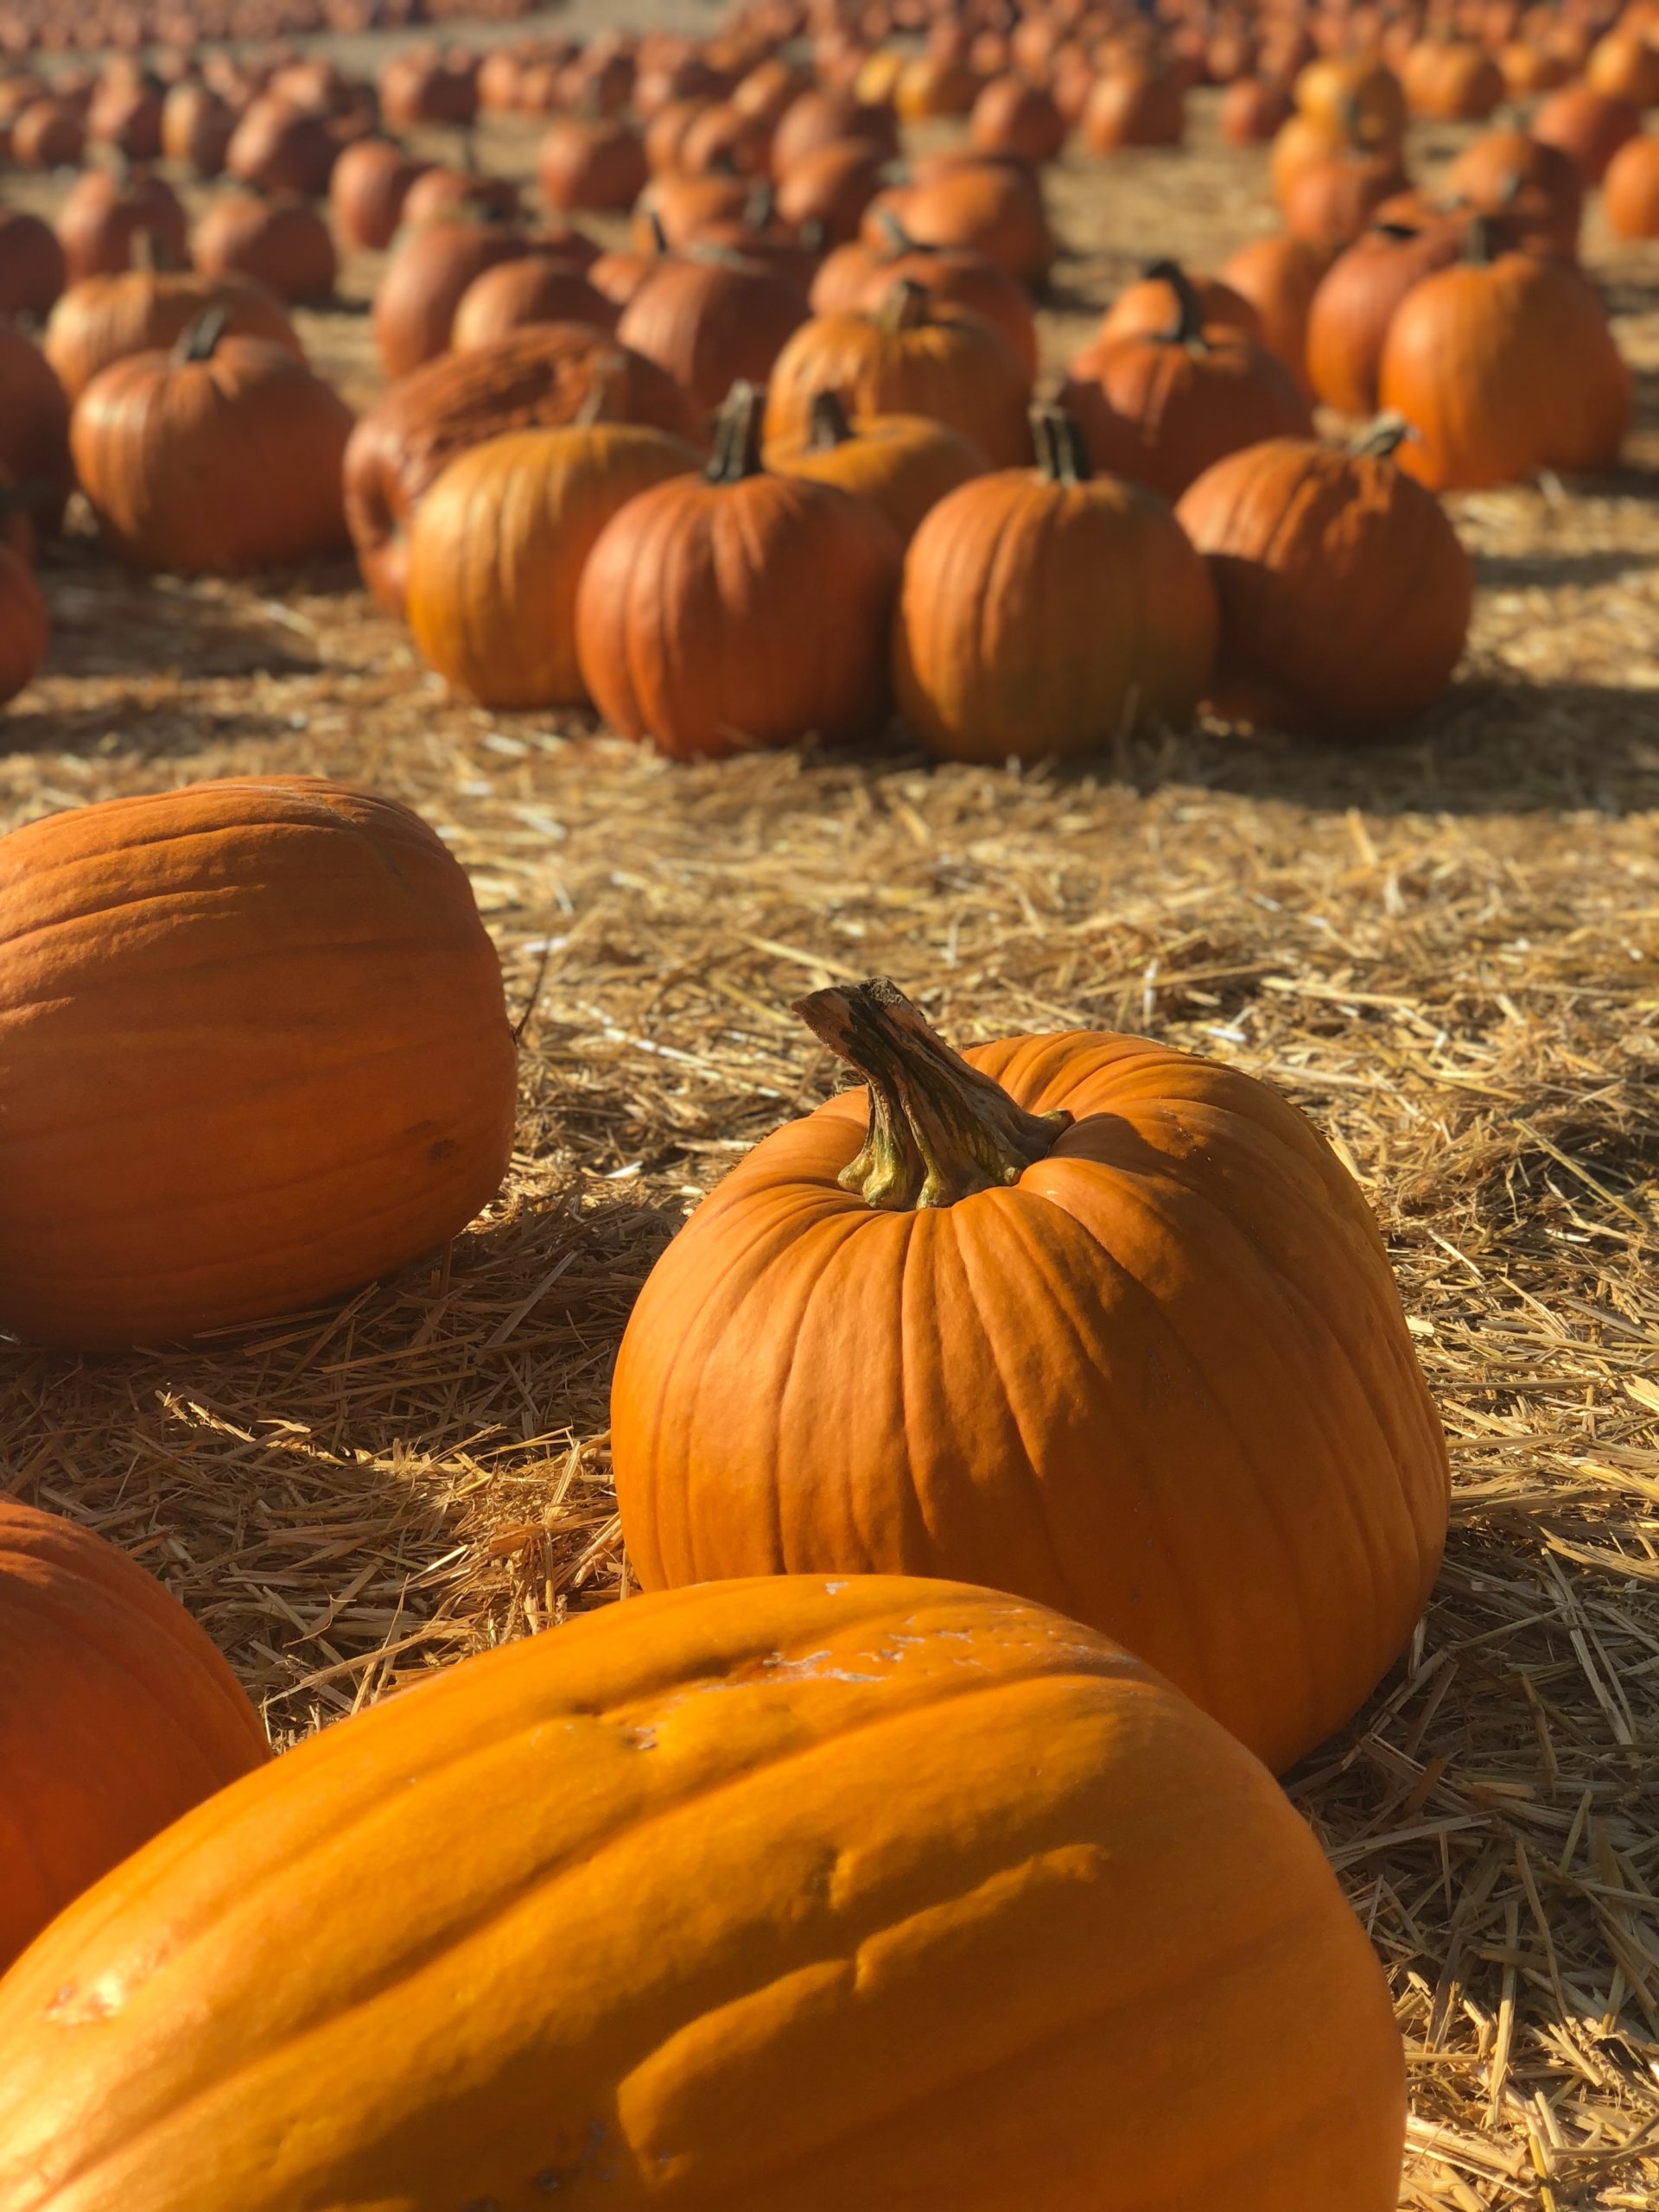 Several pumpkins sitting on the hay-covered ground